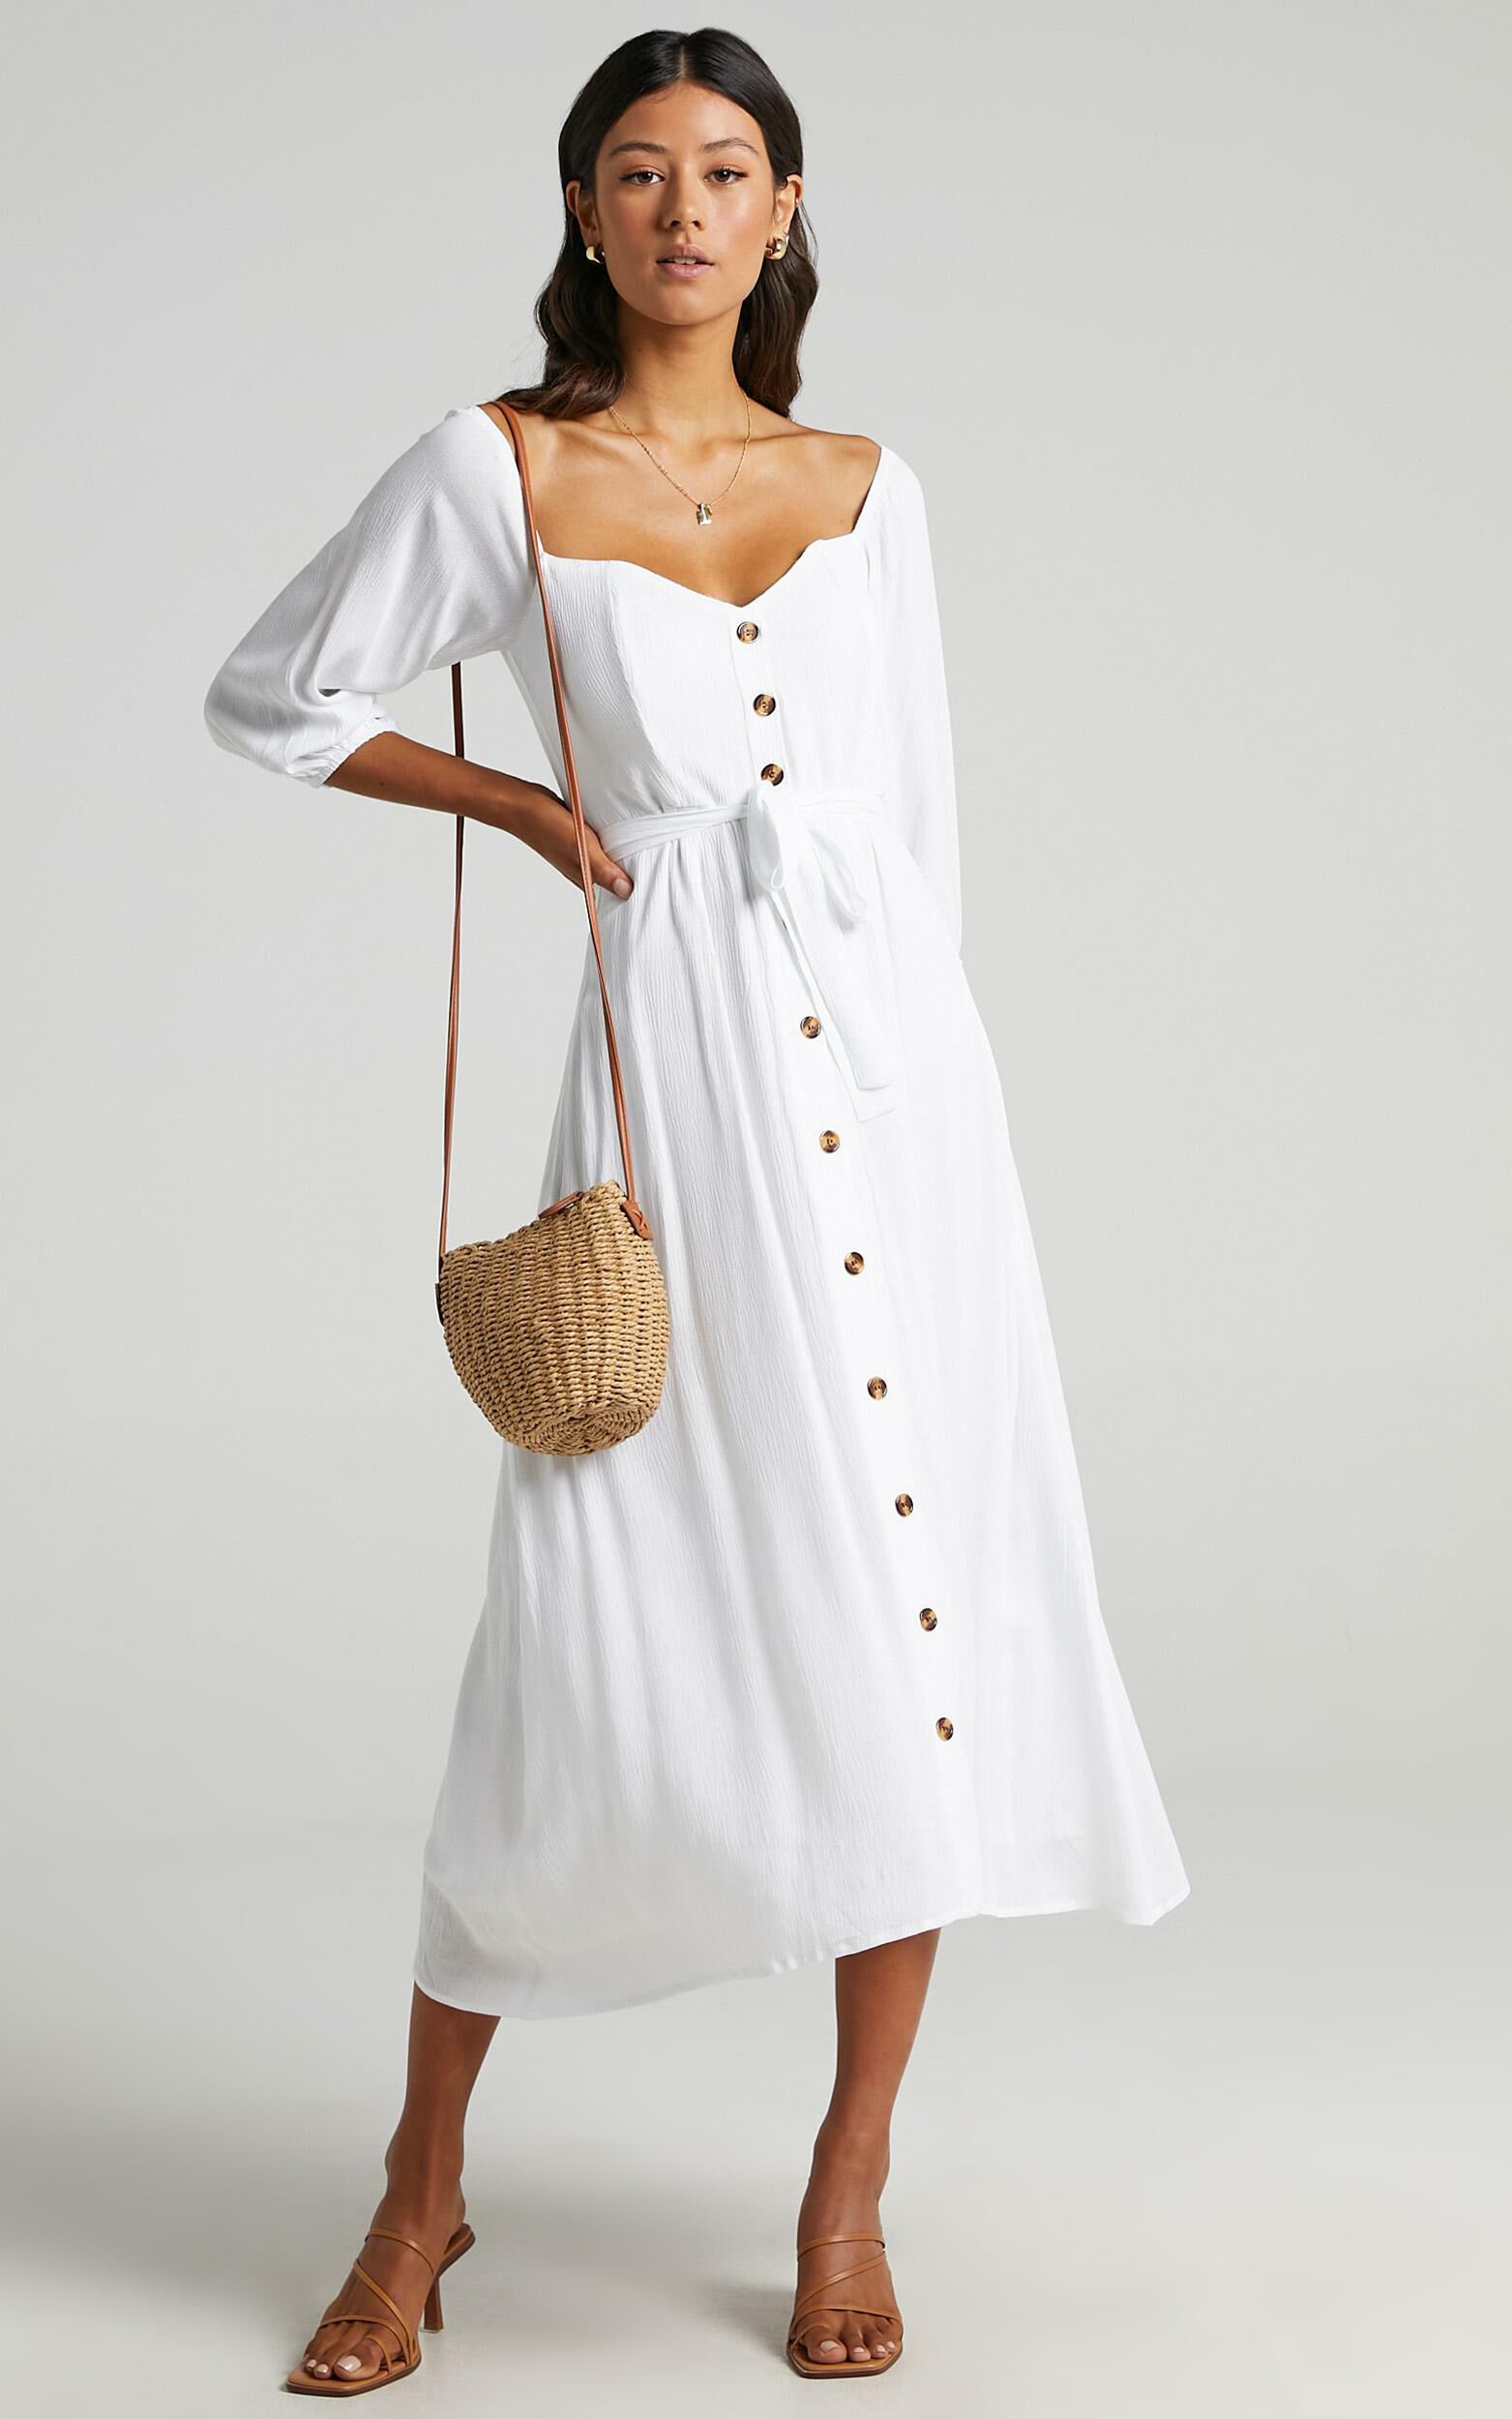 Sorrento Dreaming Midi Dress - Off Shoulder Sleeve Button Through Dress in White Linen Look - 04, WHT5